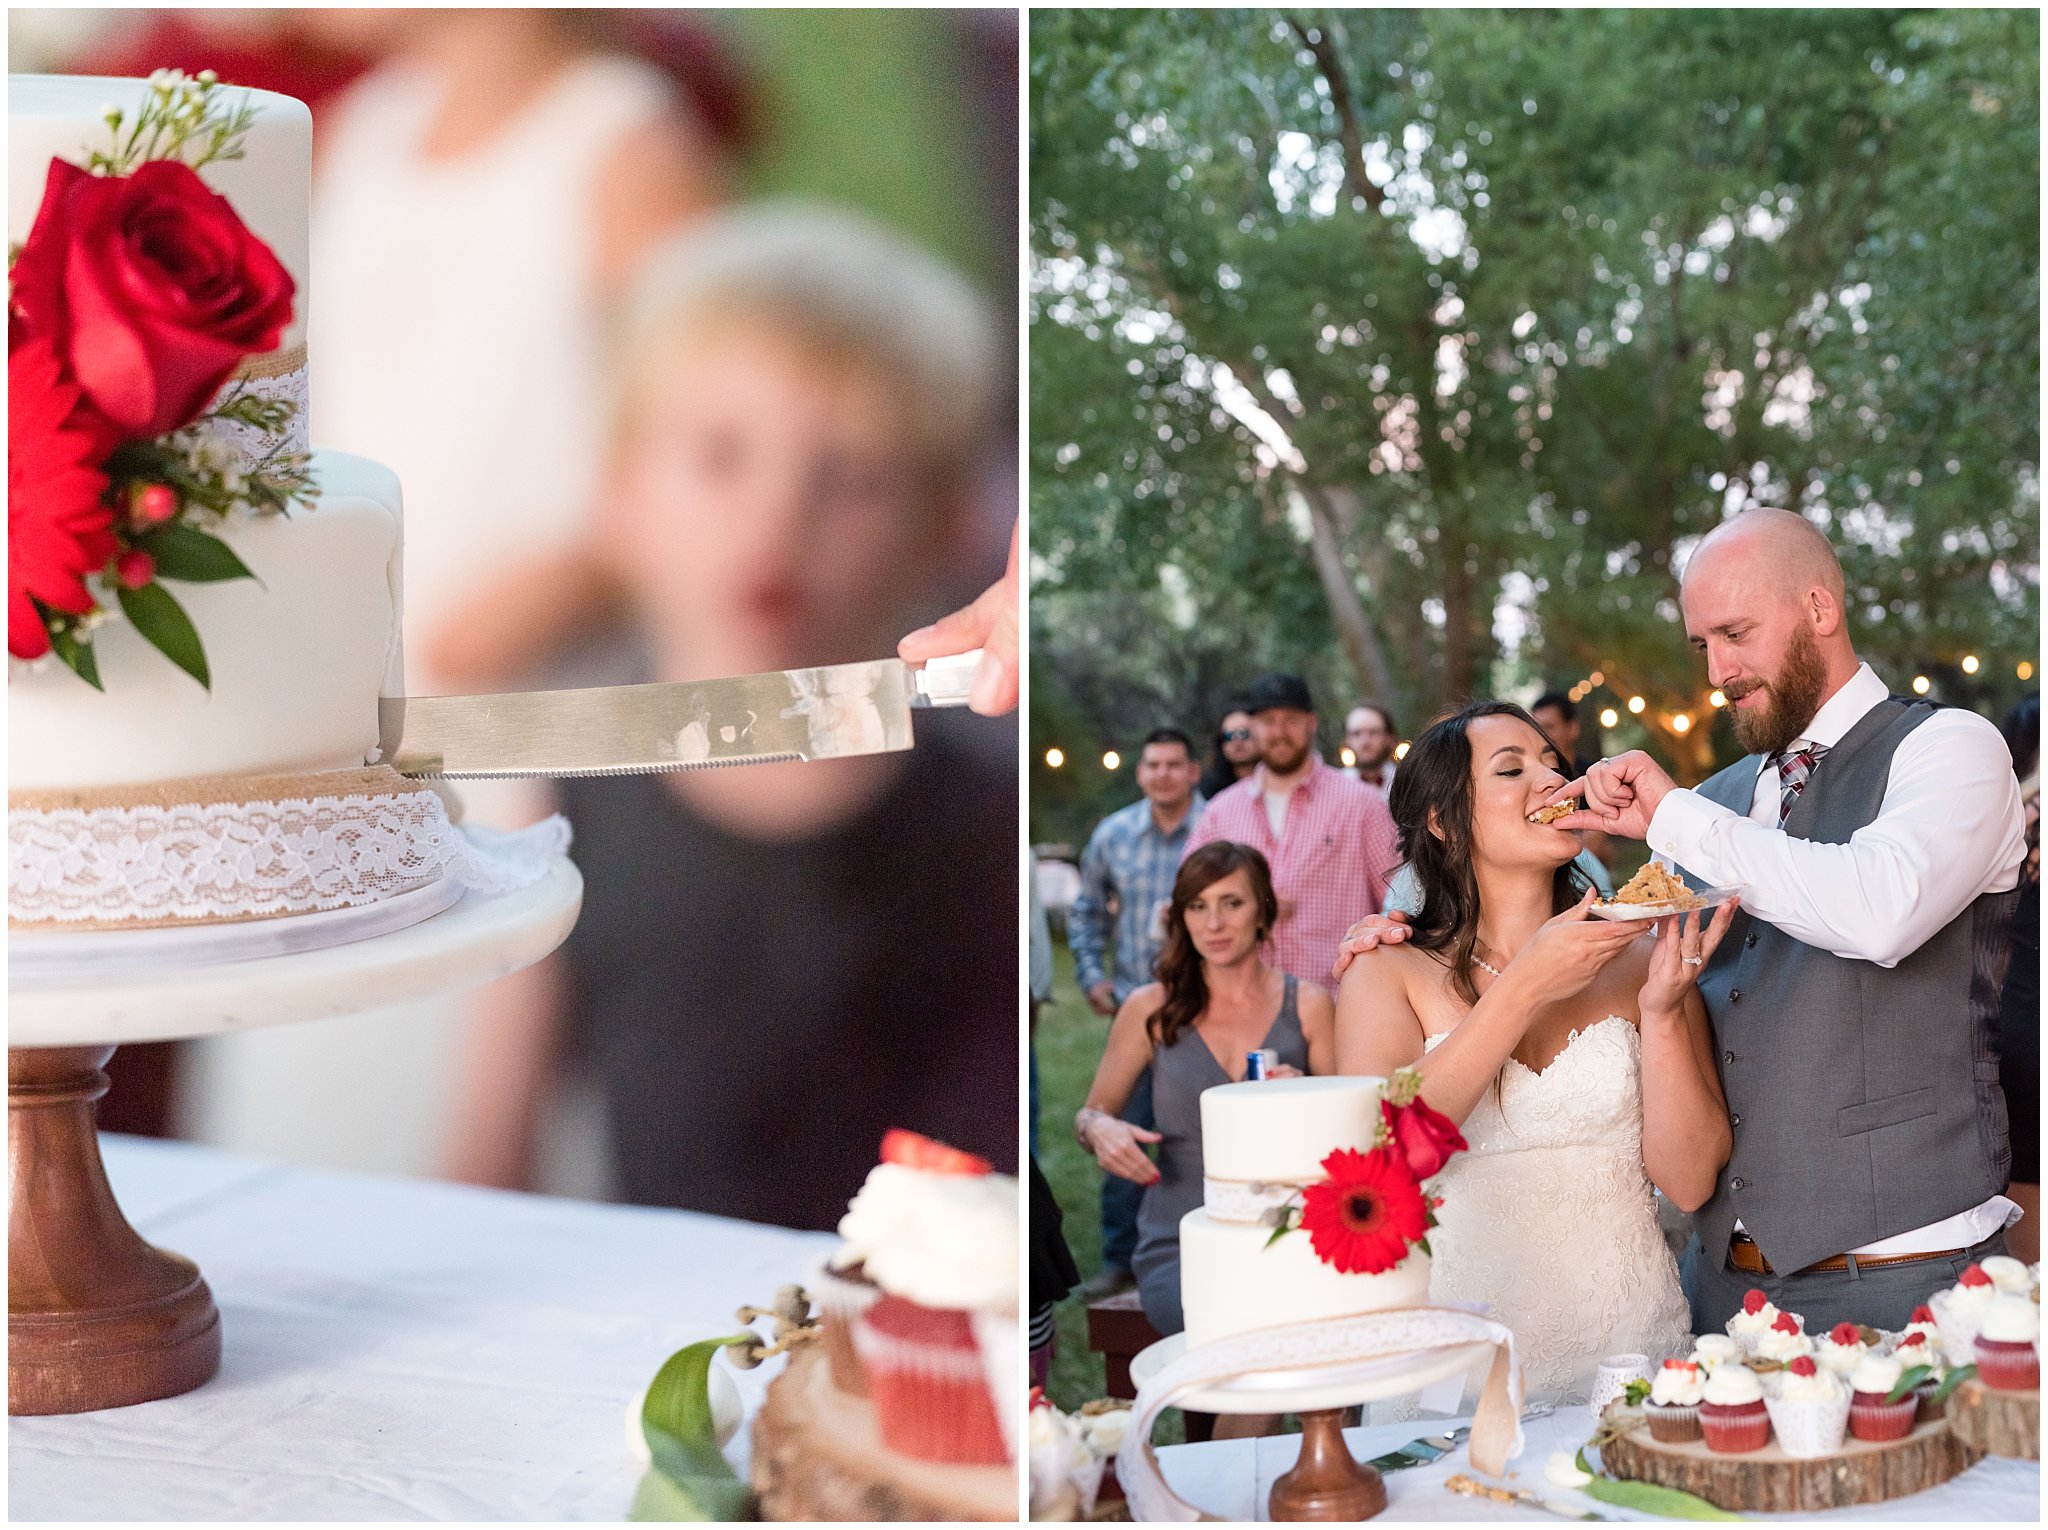 Bride and groom cutting the cake | Red and Grey wedding | Davis County Outdoor Wedding | Jessie and Dallin Photography